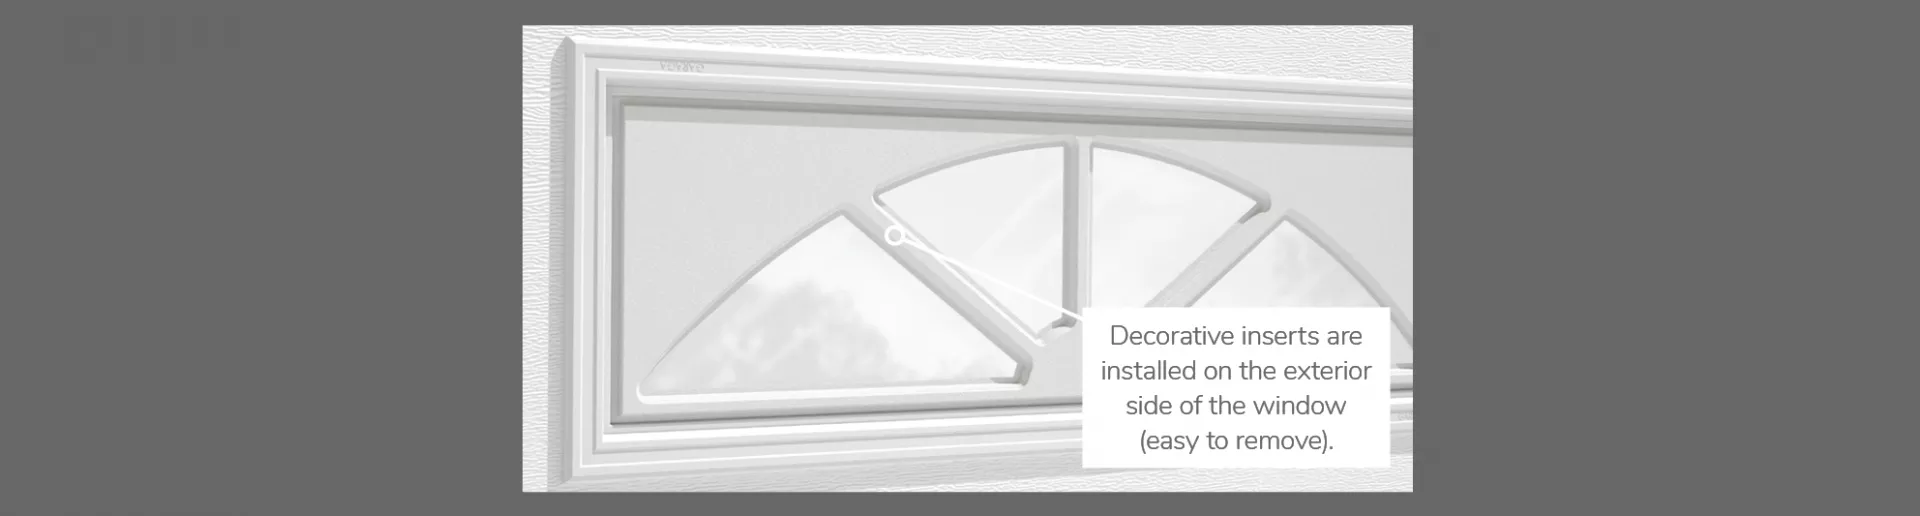 Sherwood Decorative Insert, 40" x 13" or 41" x 16", available for door R-16, 3 layers - Polystyrene,  2 layers - Polystyrene and Non-insulated